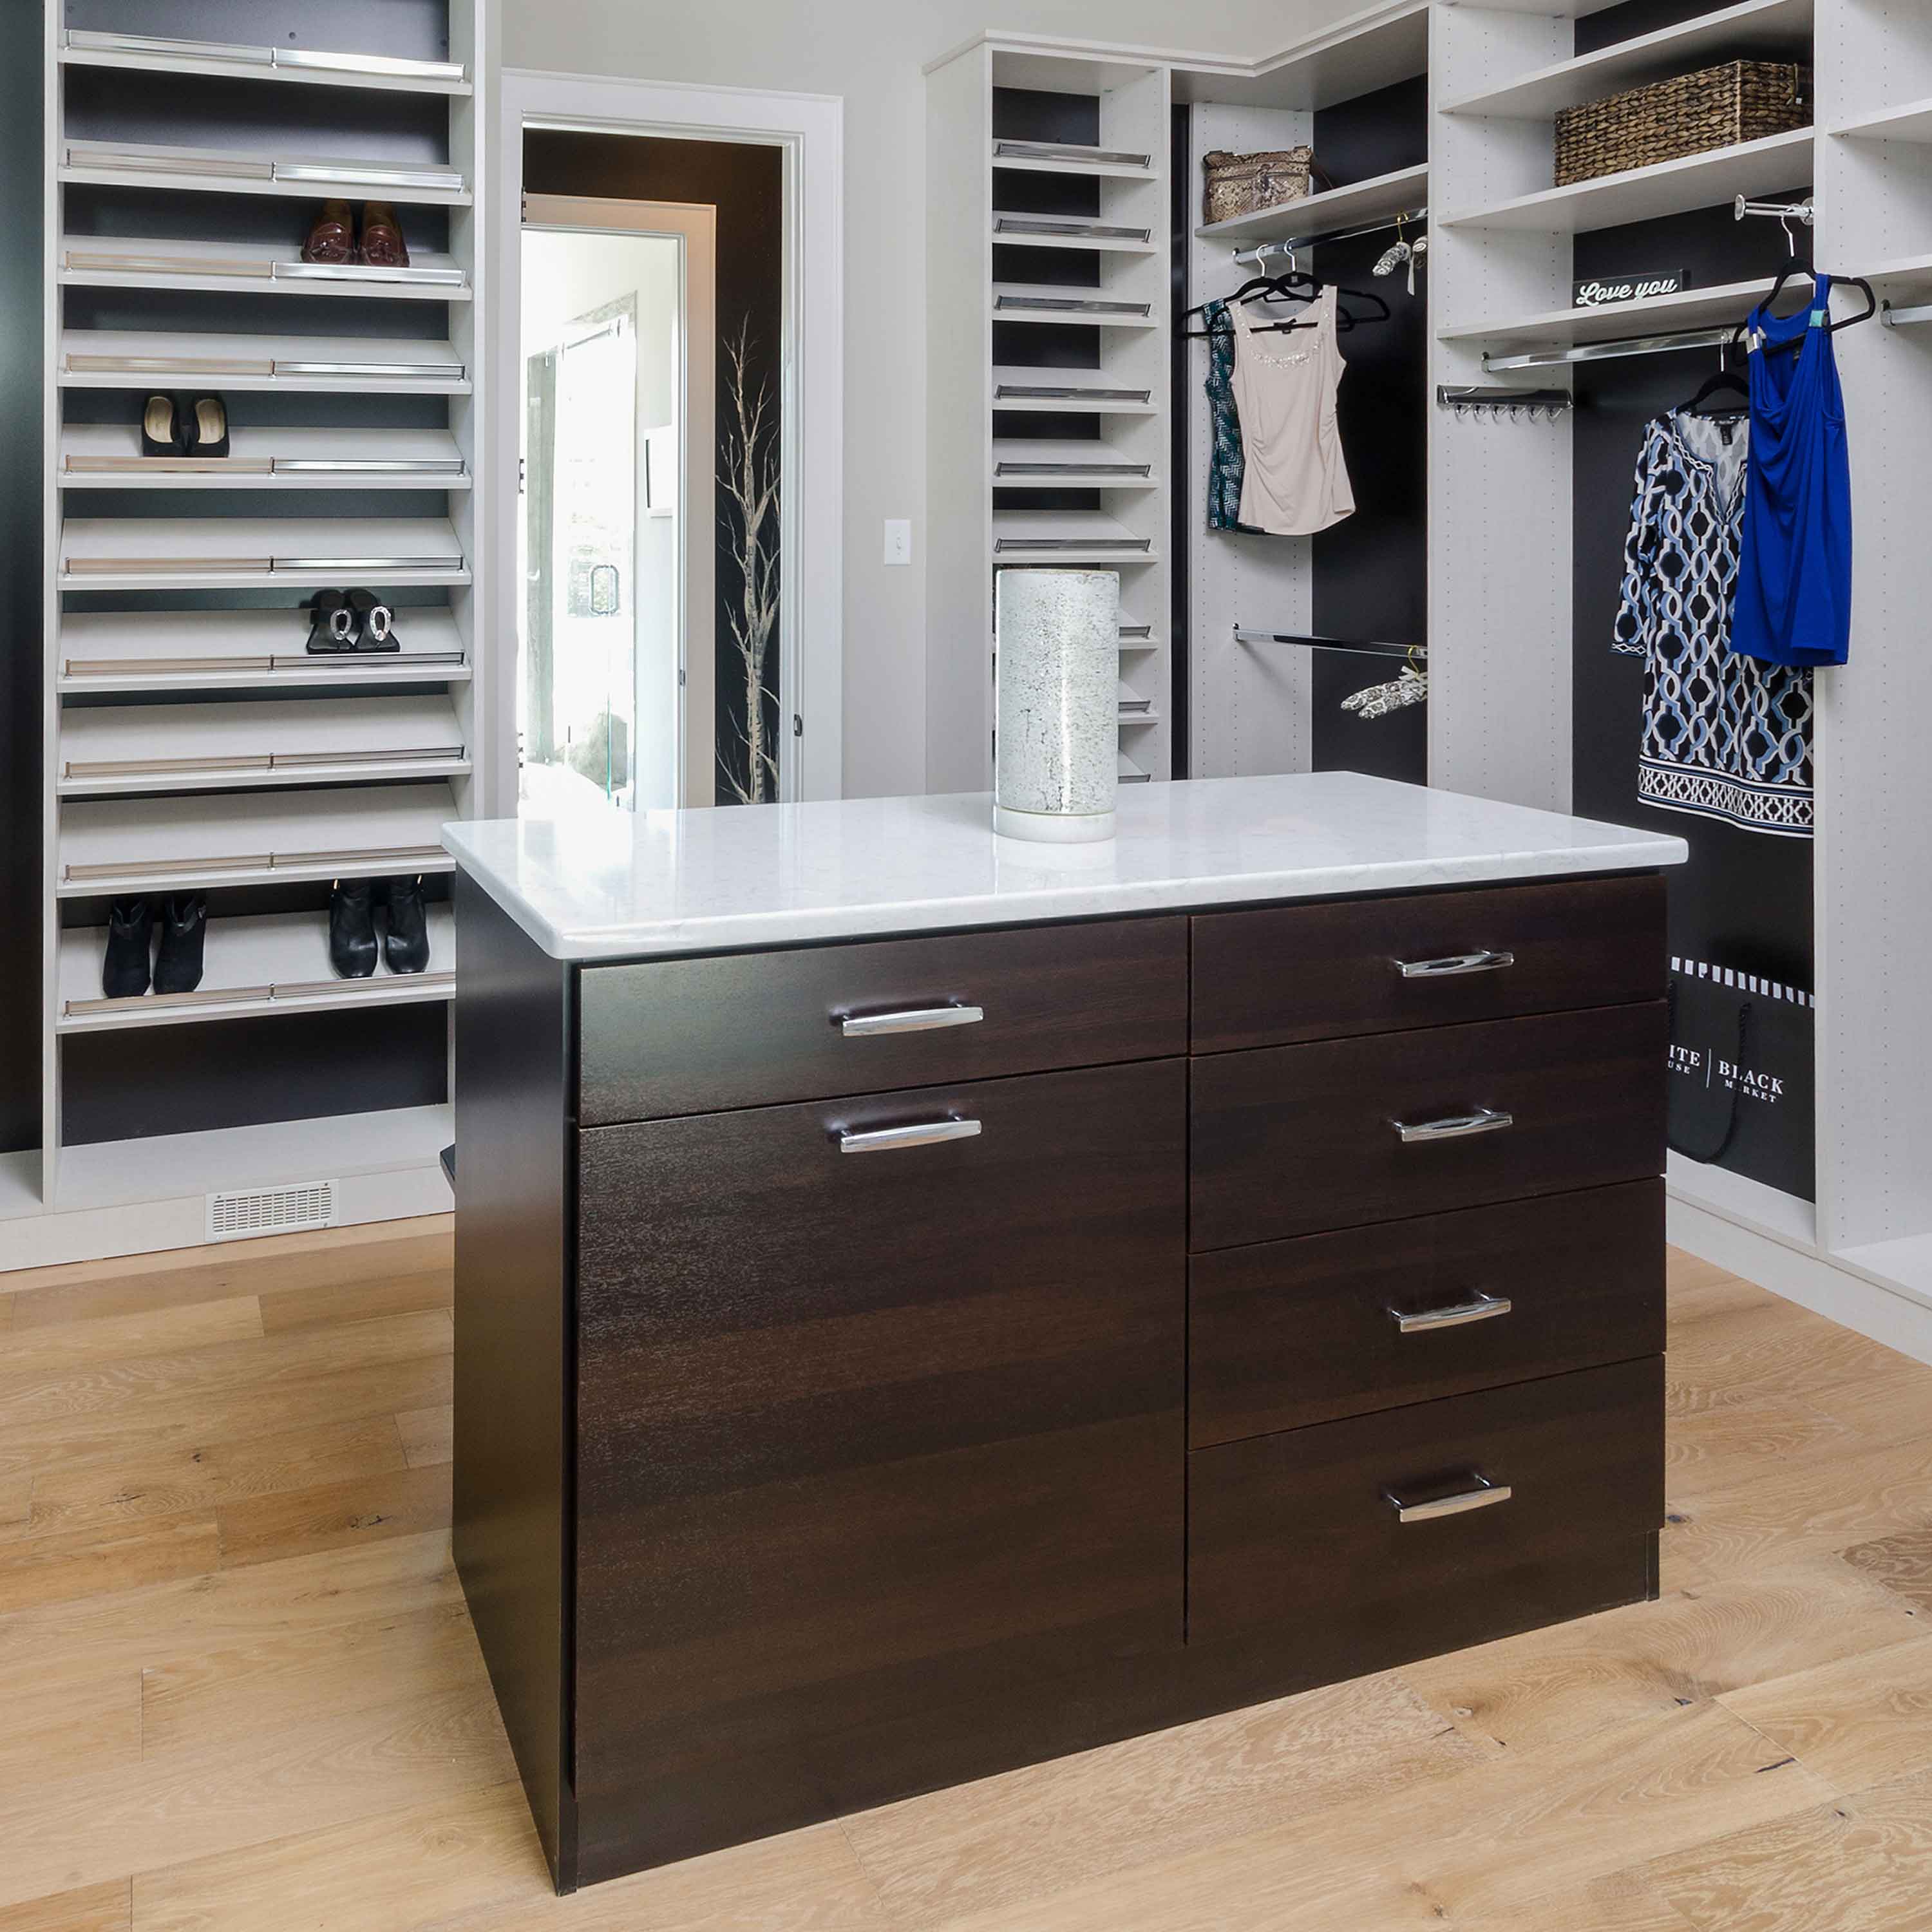 A dark wood island with a white marble top sits in the center of a white closet